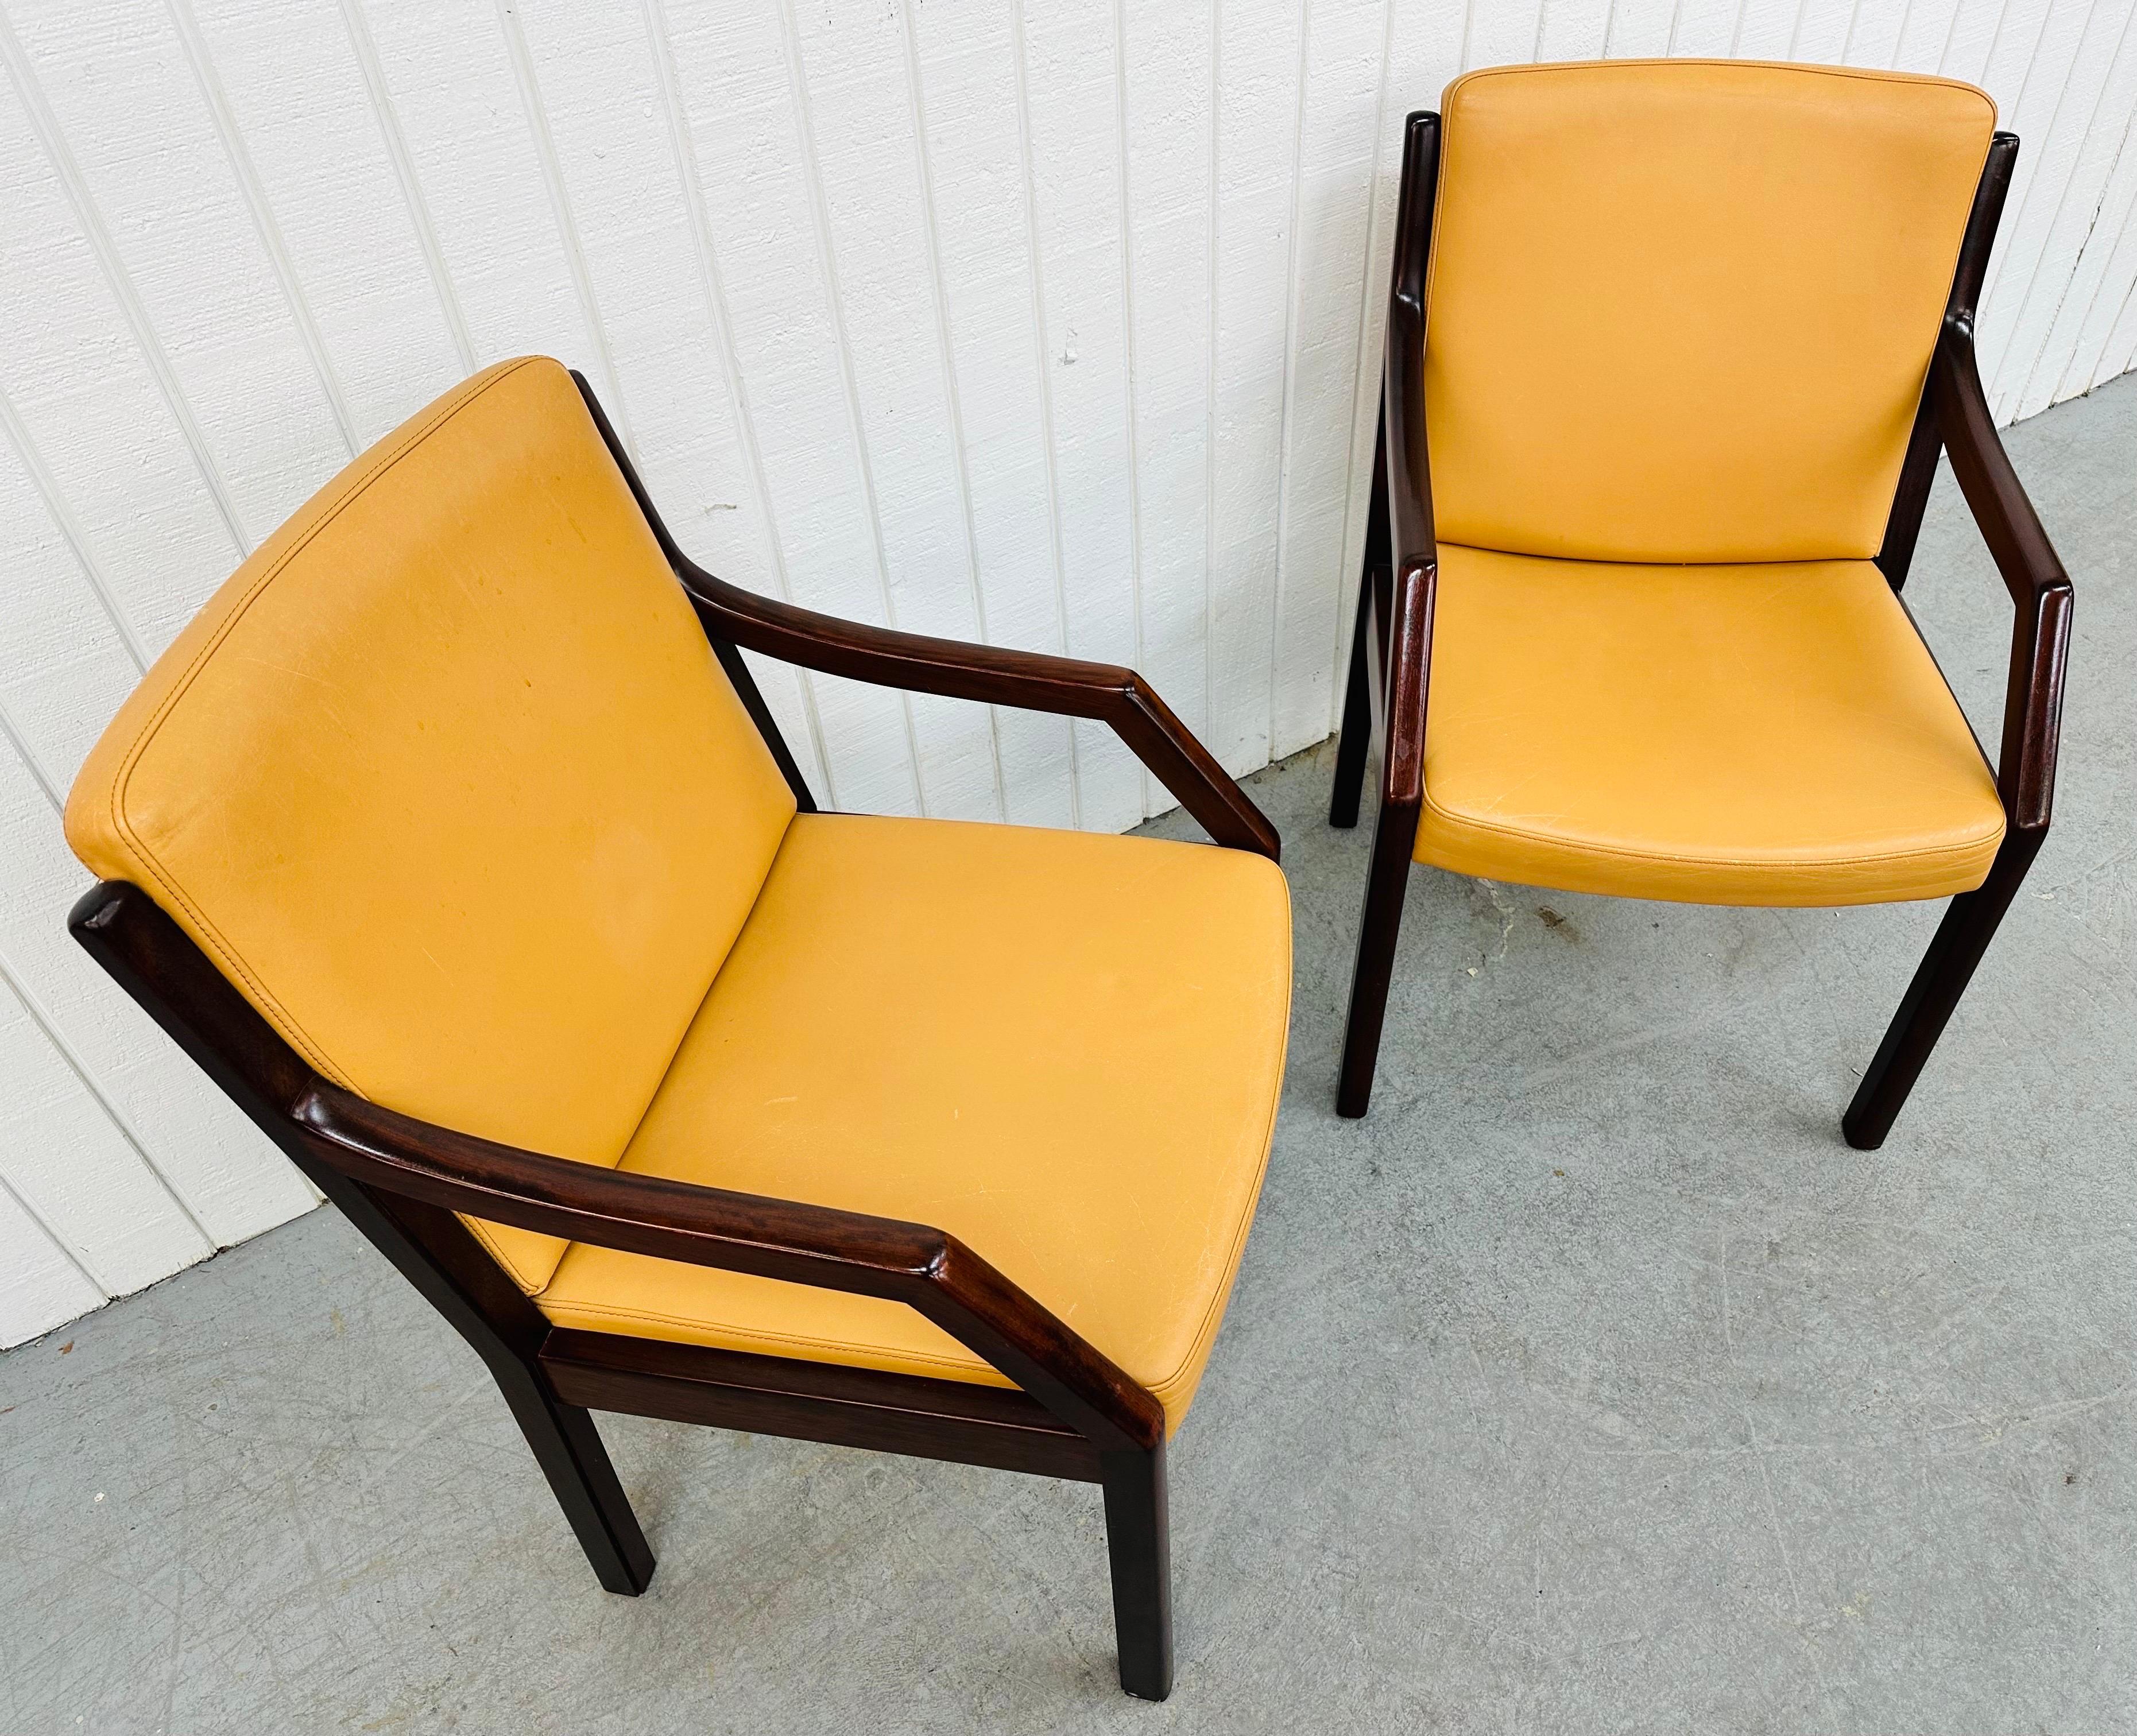 American Vintage Dunbar Lounge Chairs - Set of 2 For Sale